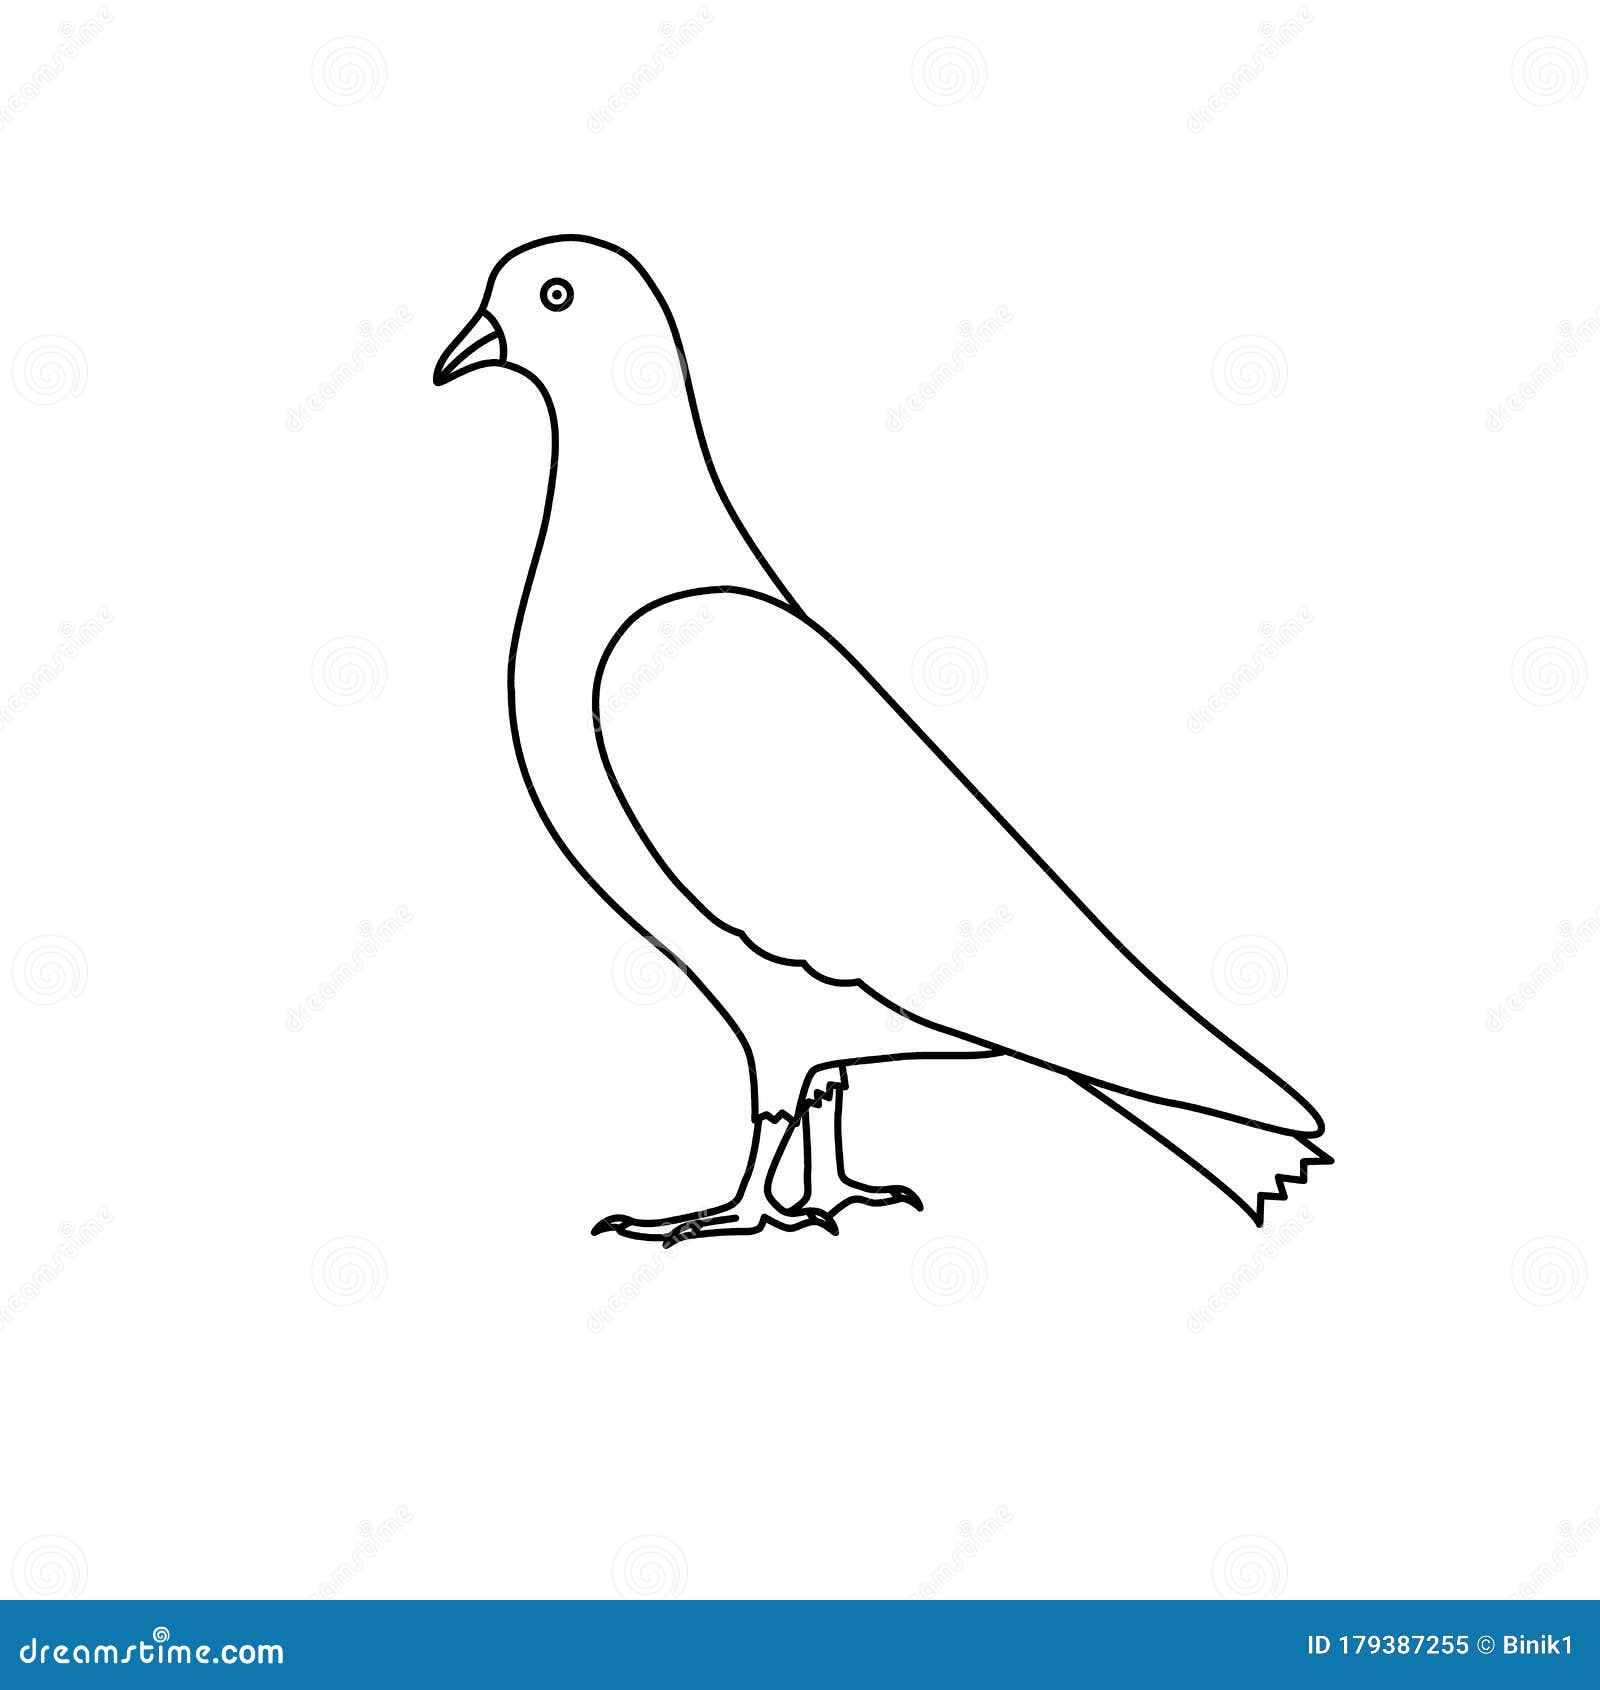 How To Draw The Pigeon